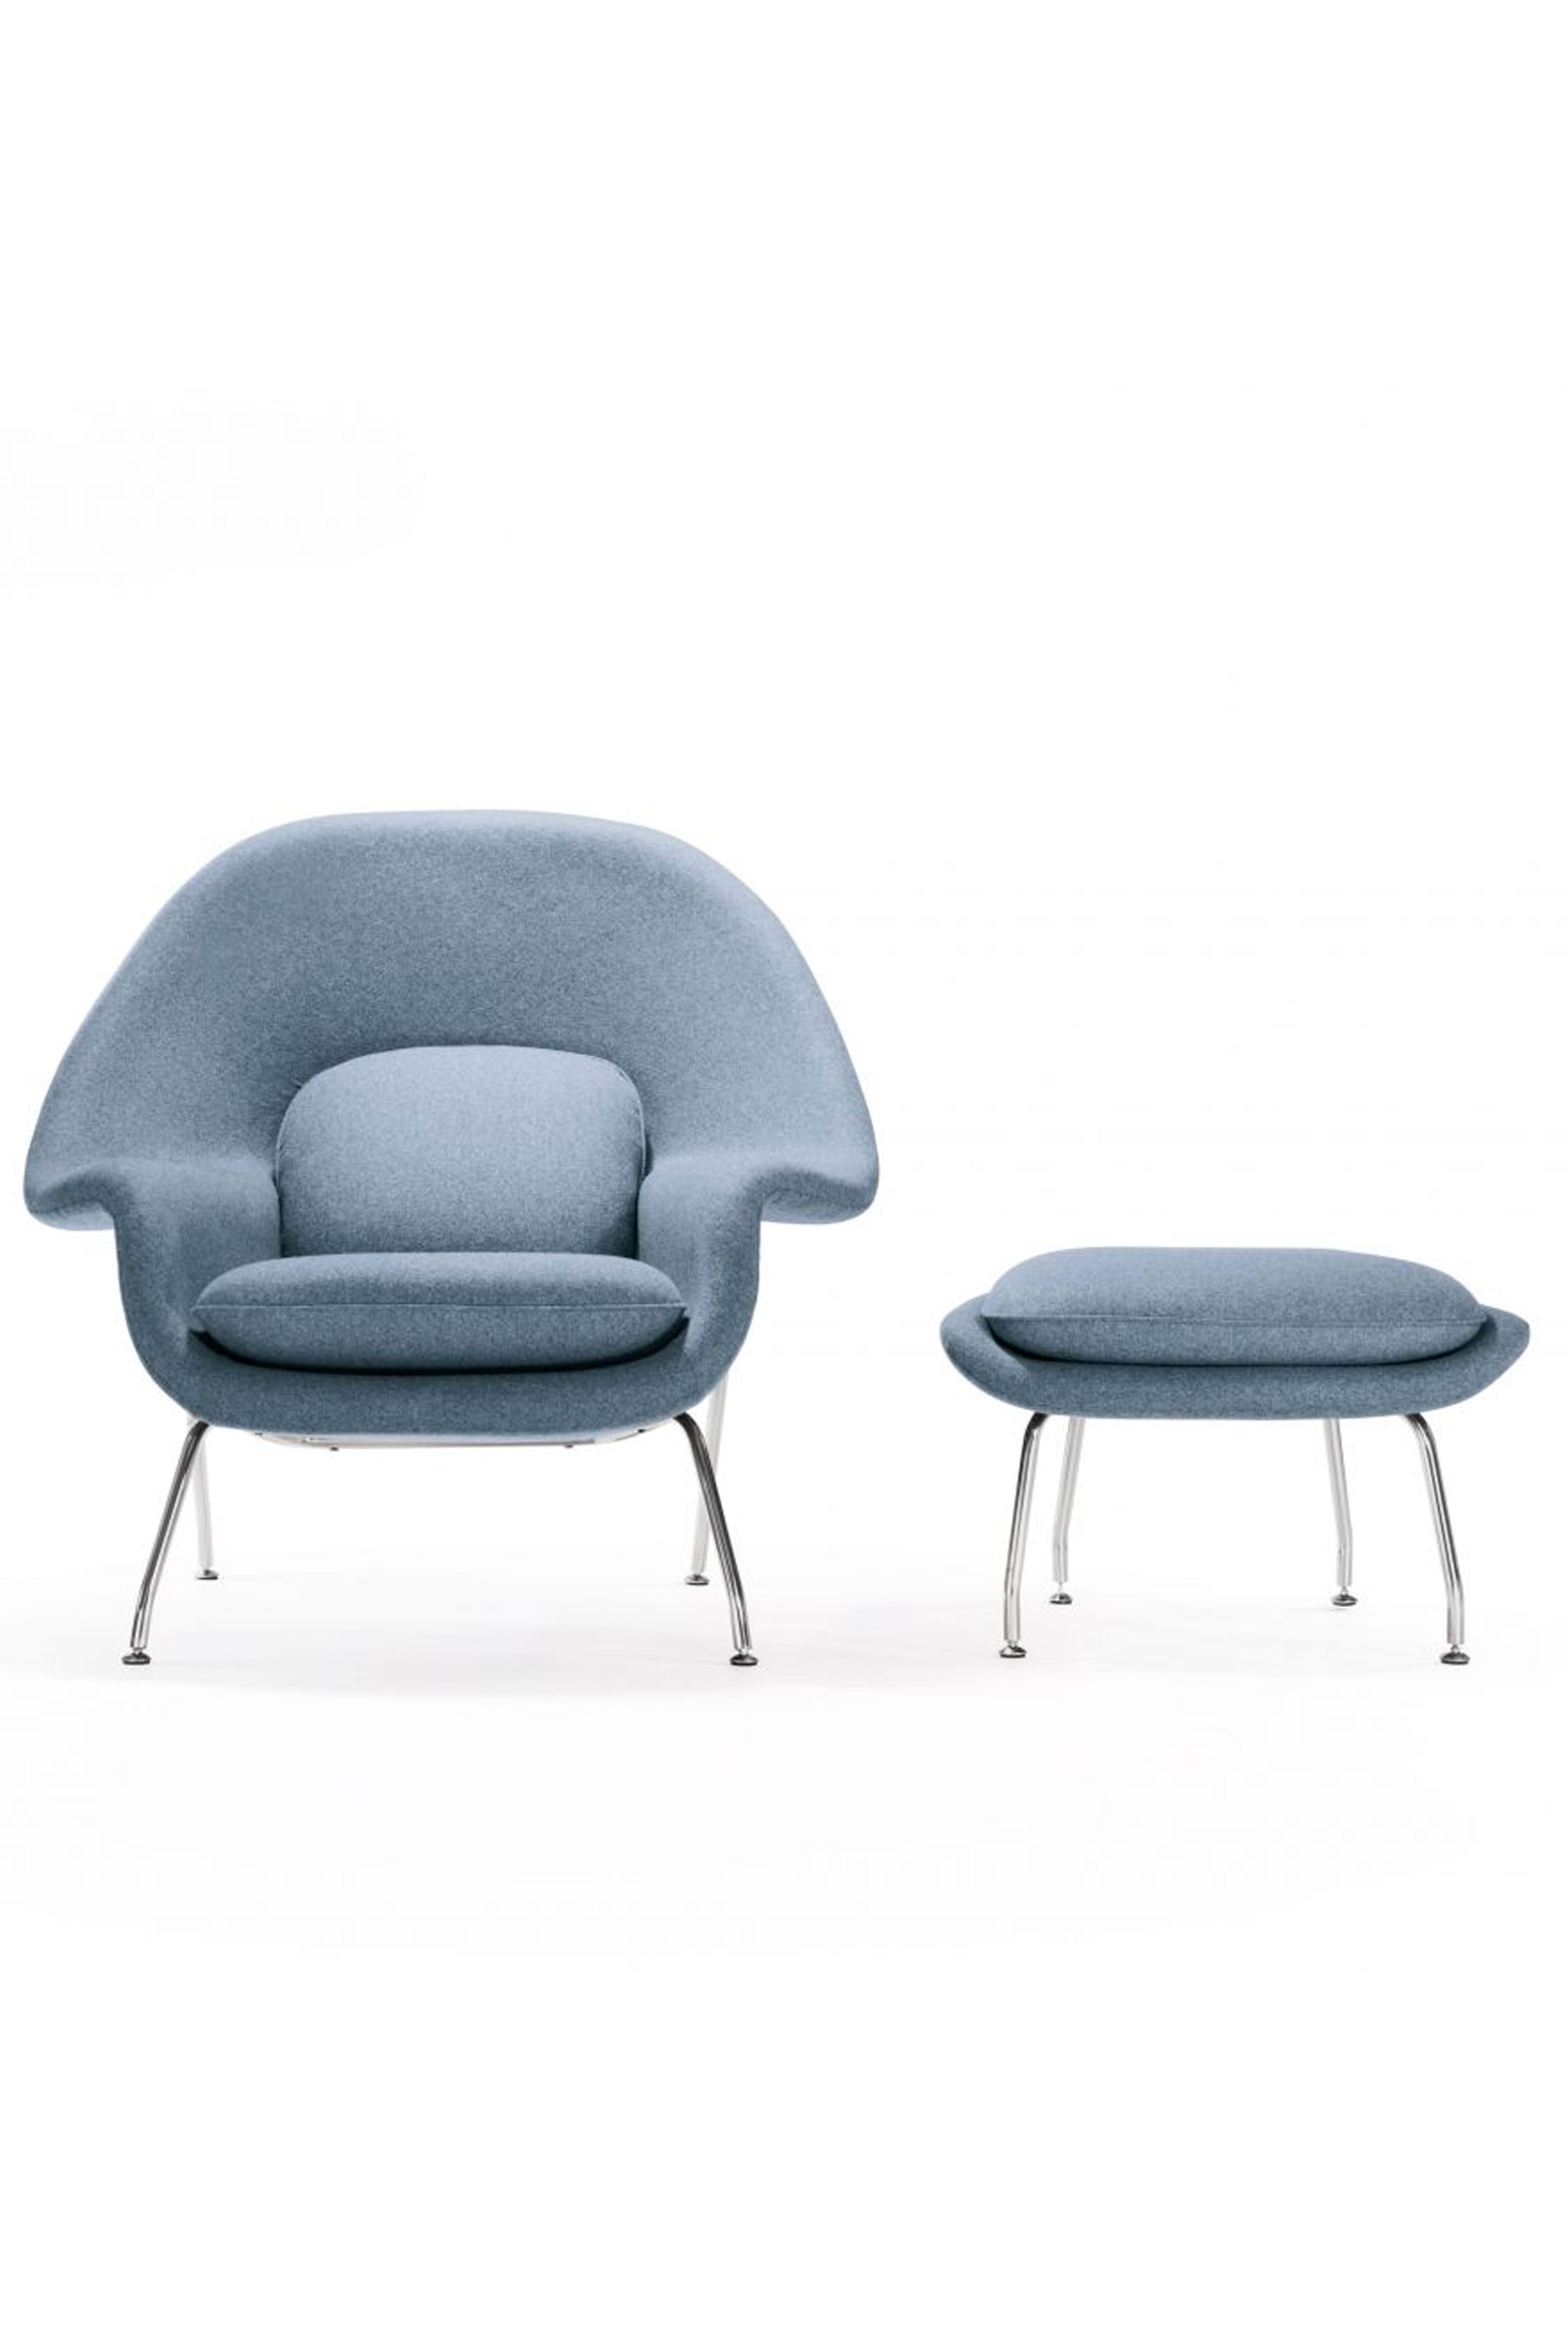 20 Best Reading Chairs - Oversized Chairs For Reading